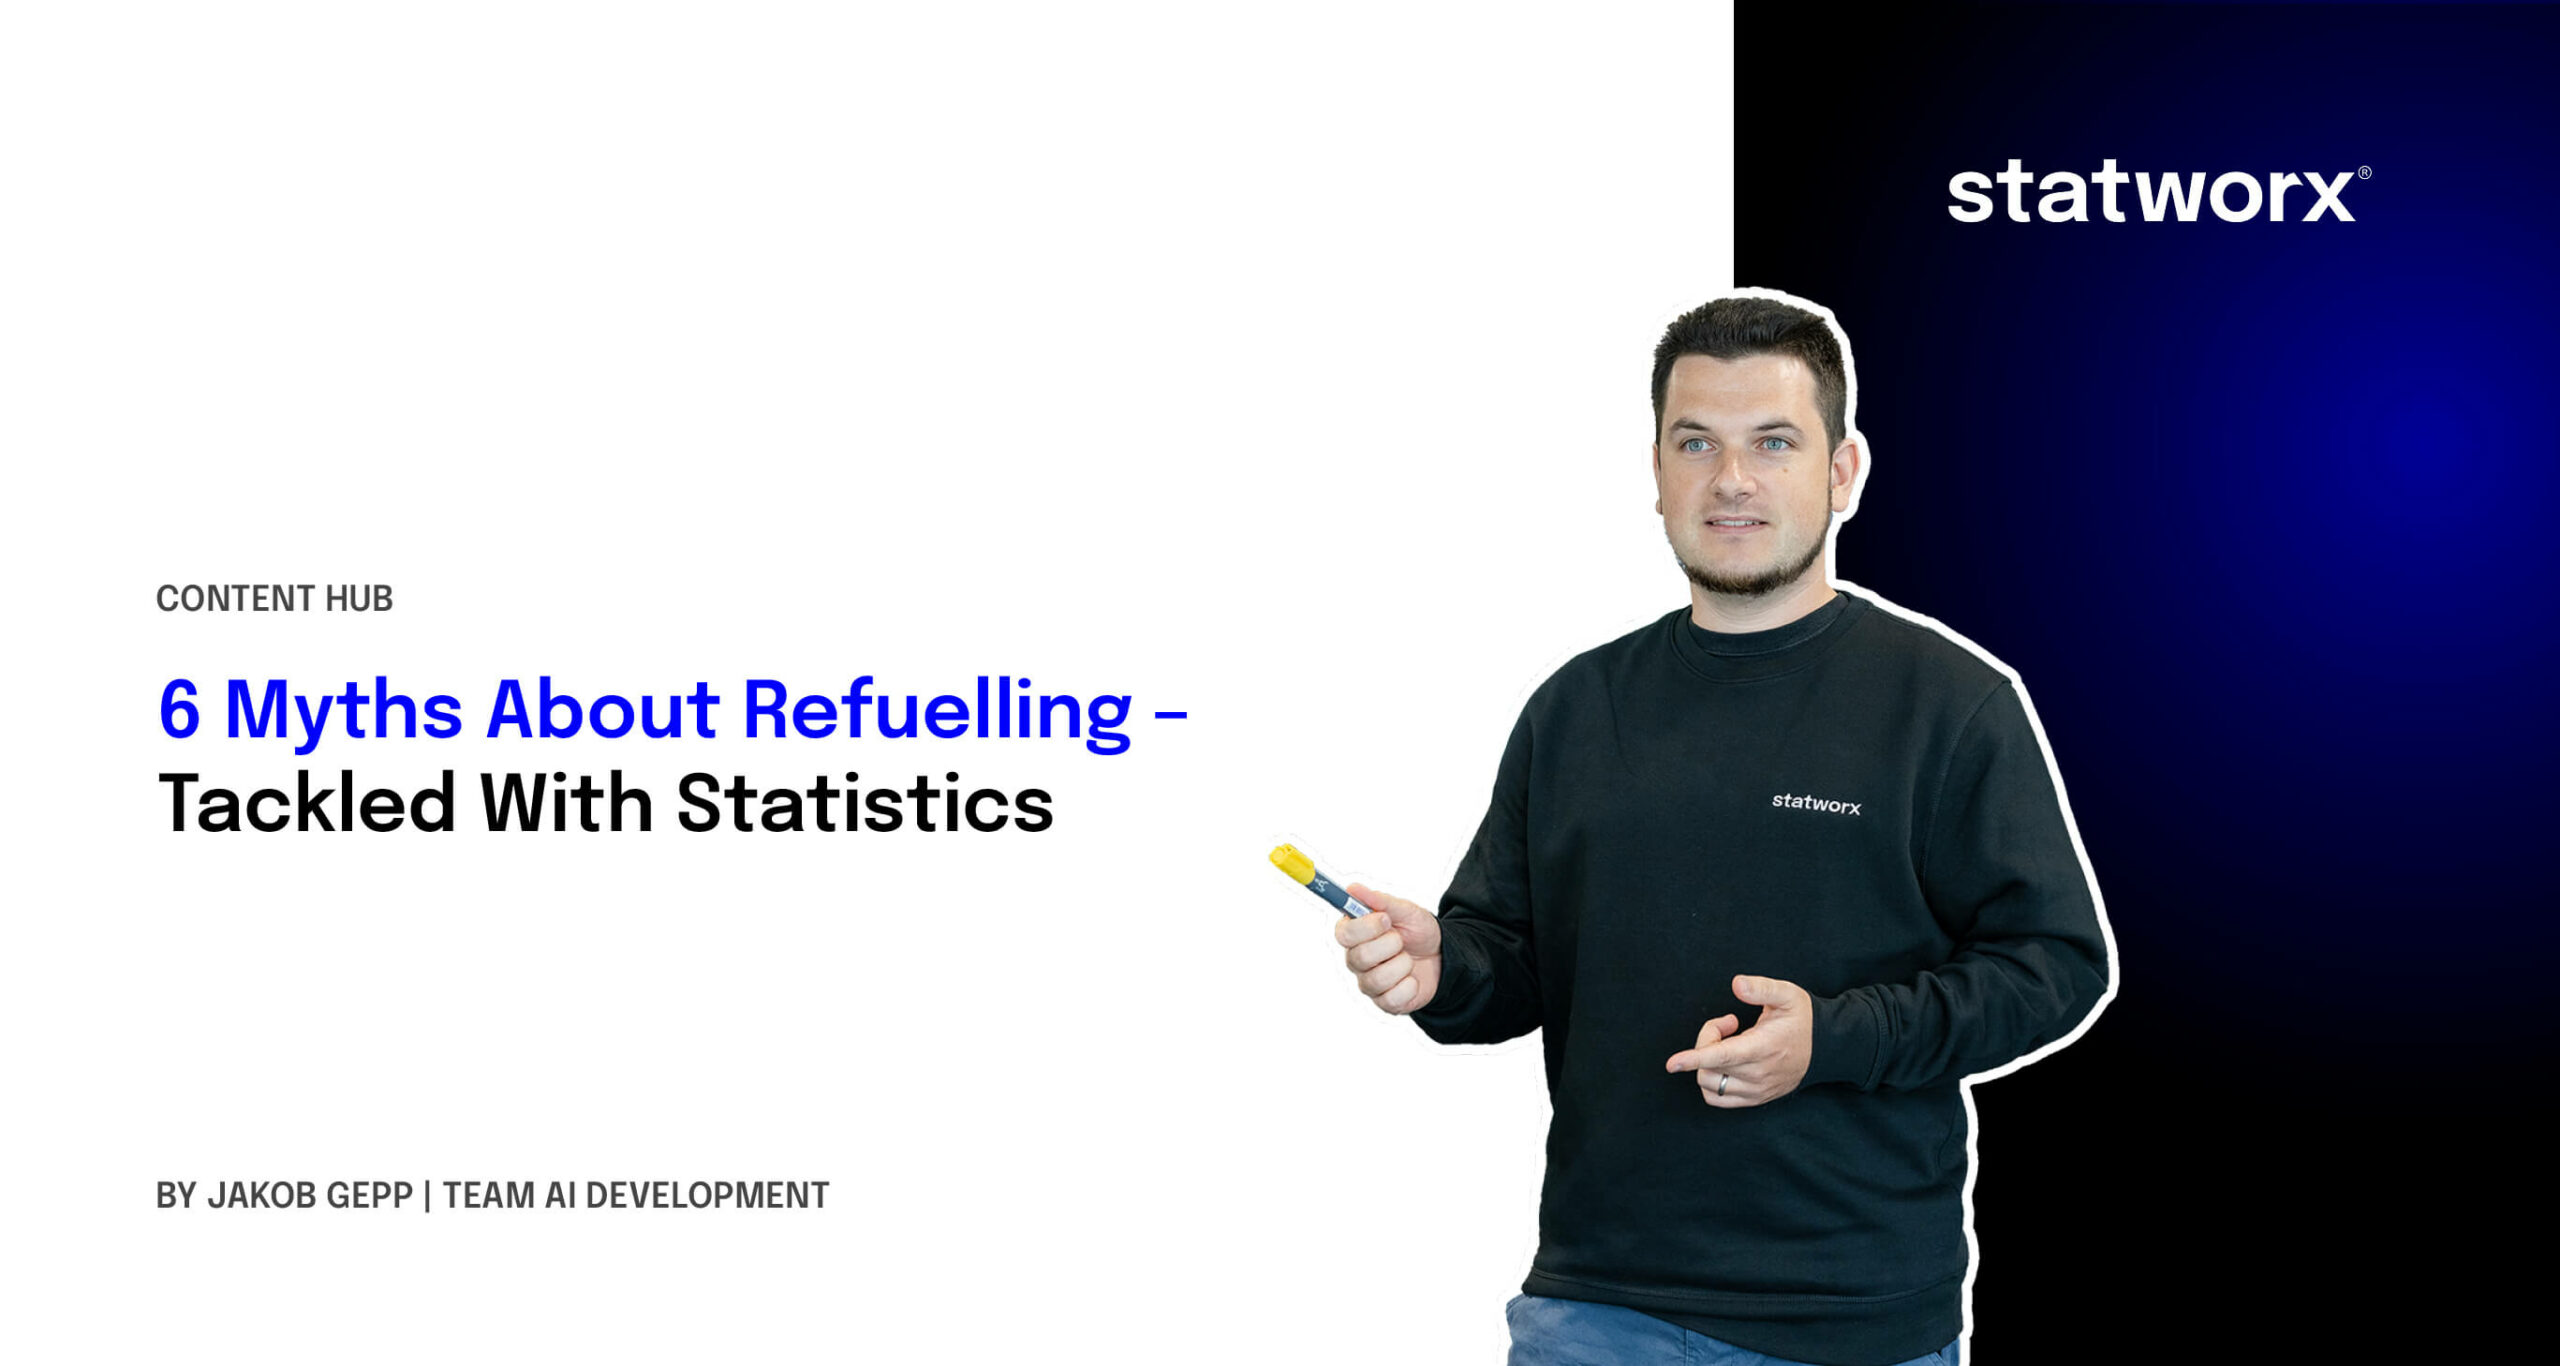 6 Myths About Refueling – Tackled With Statistics